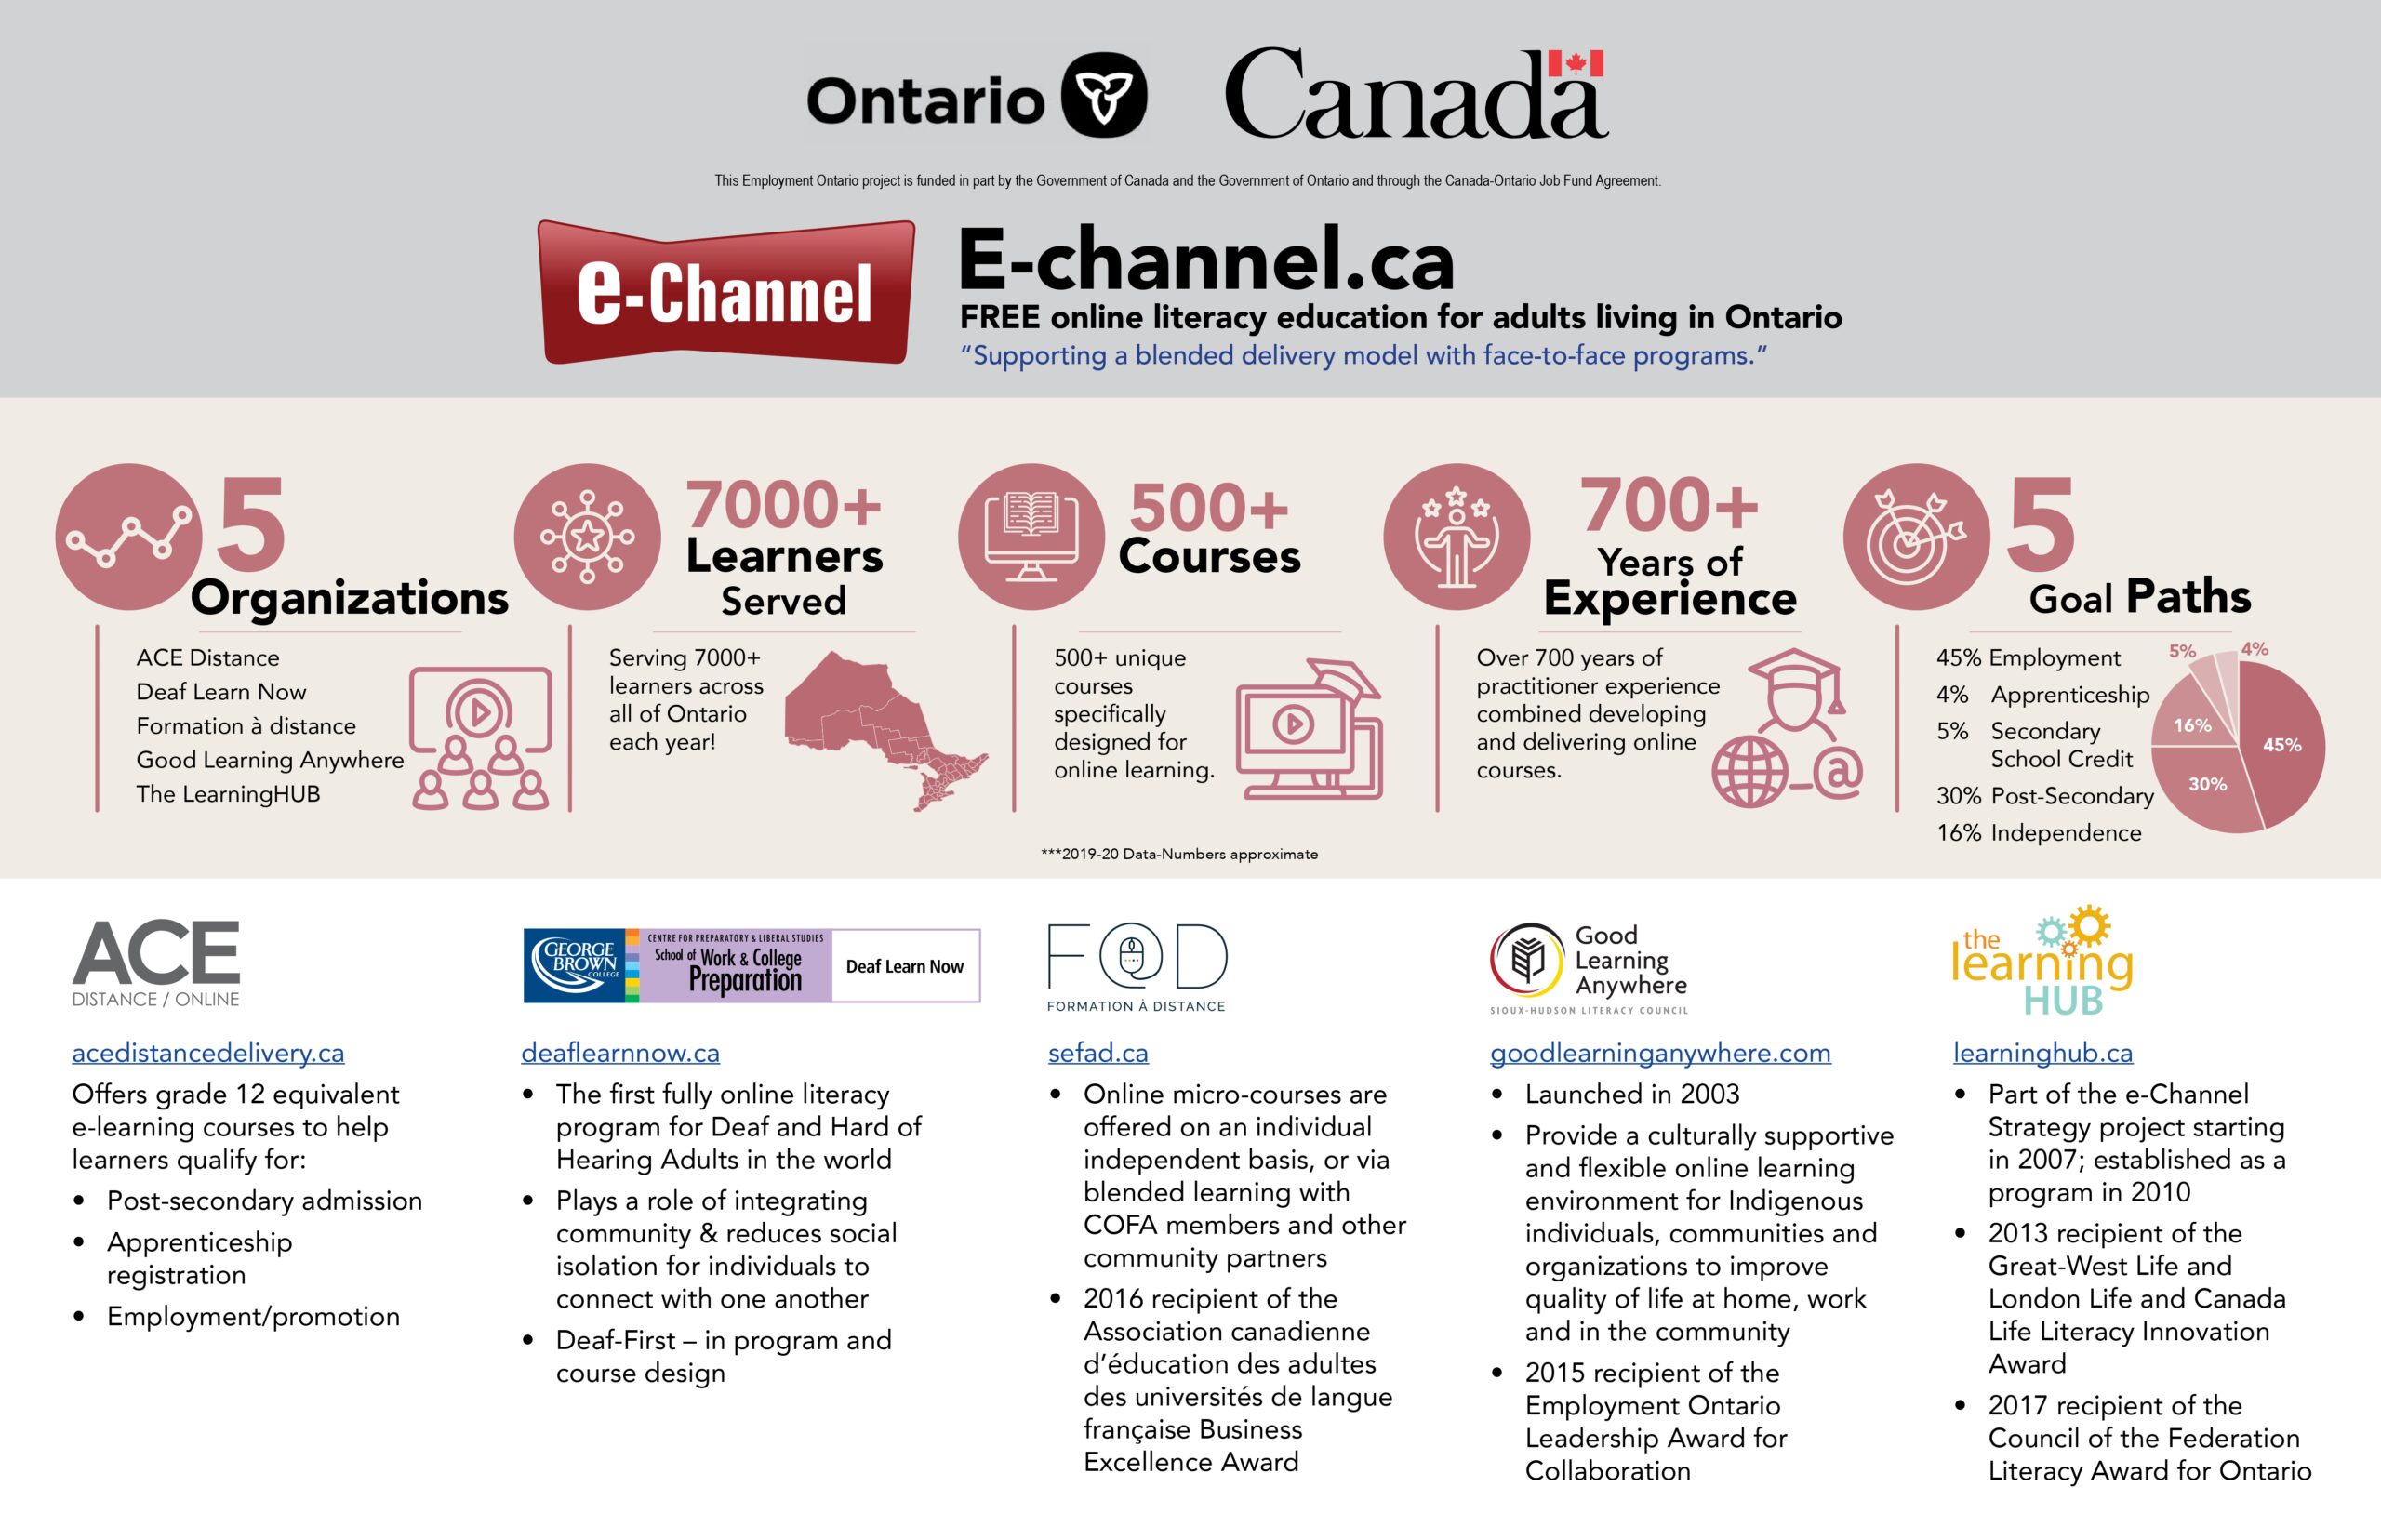 e-Channel Snapshot infographic